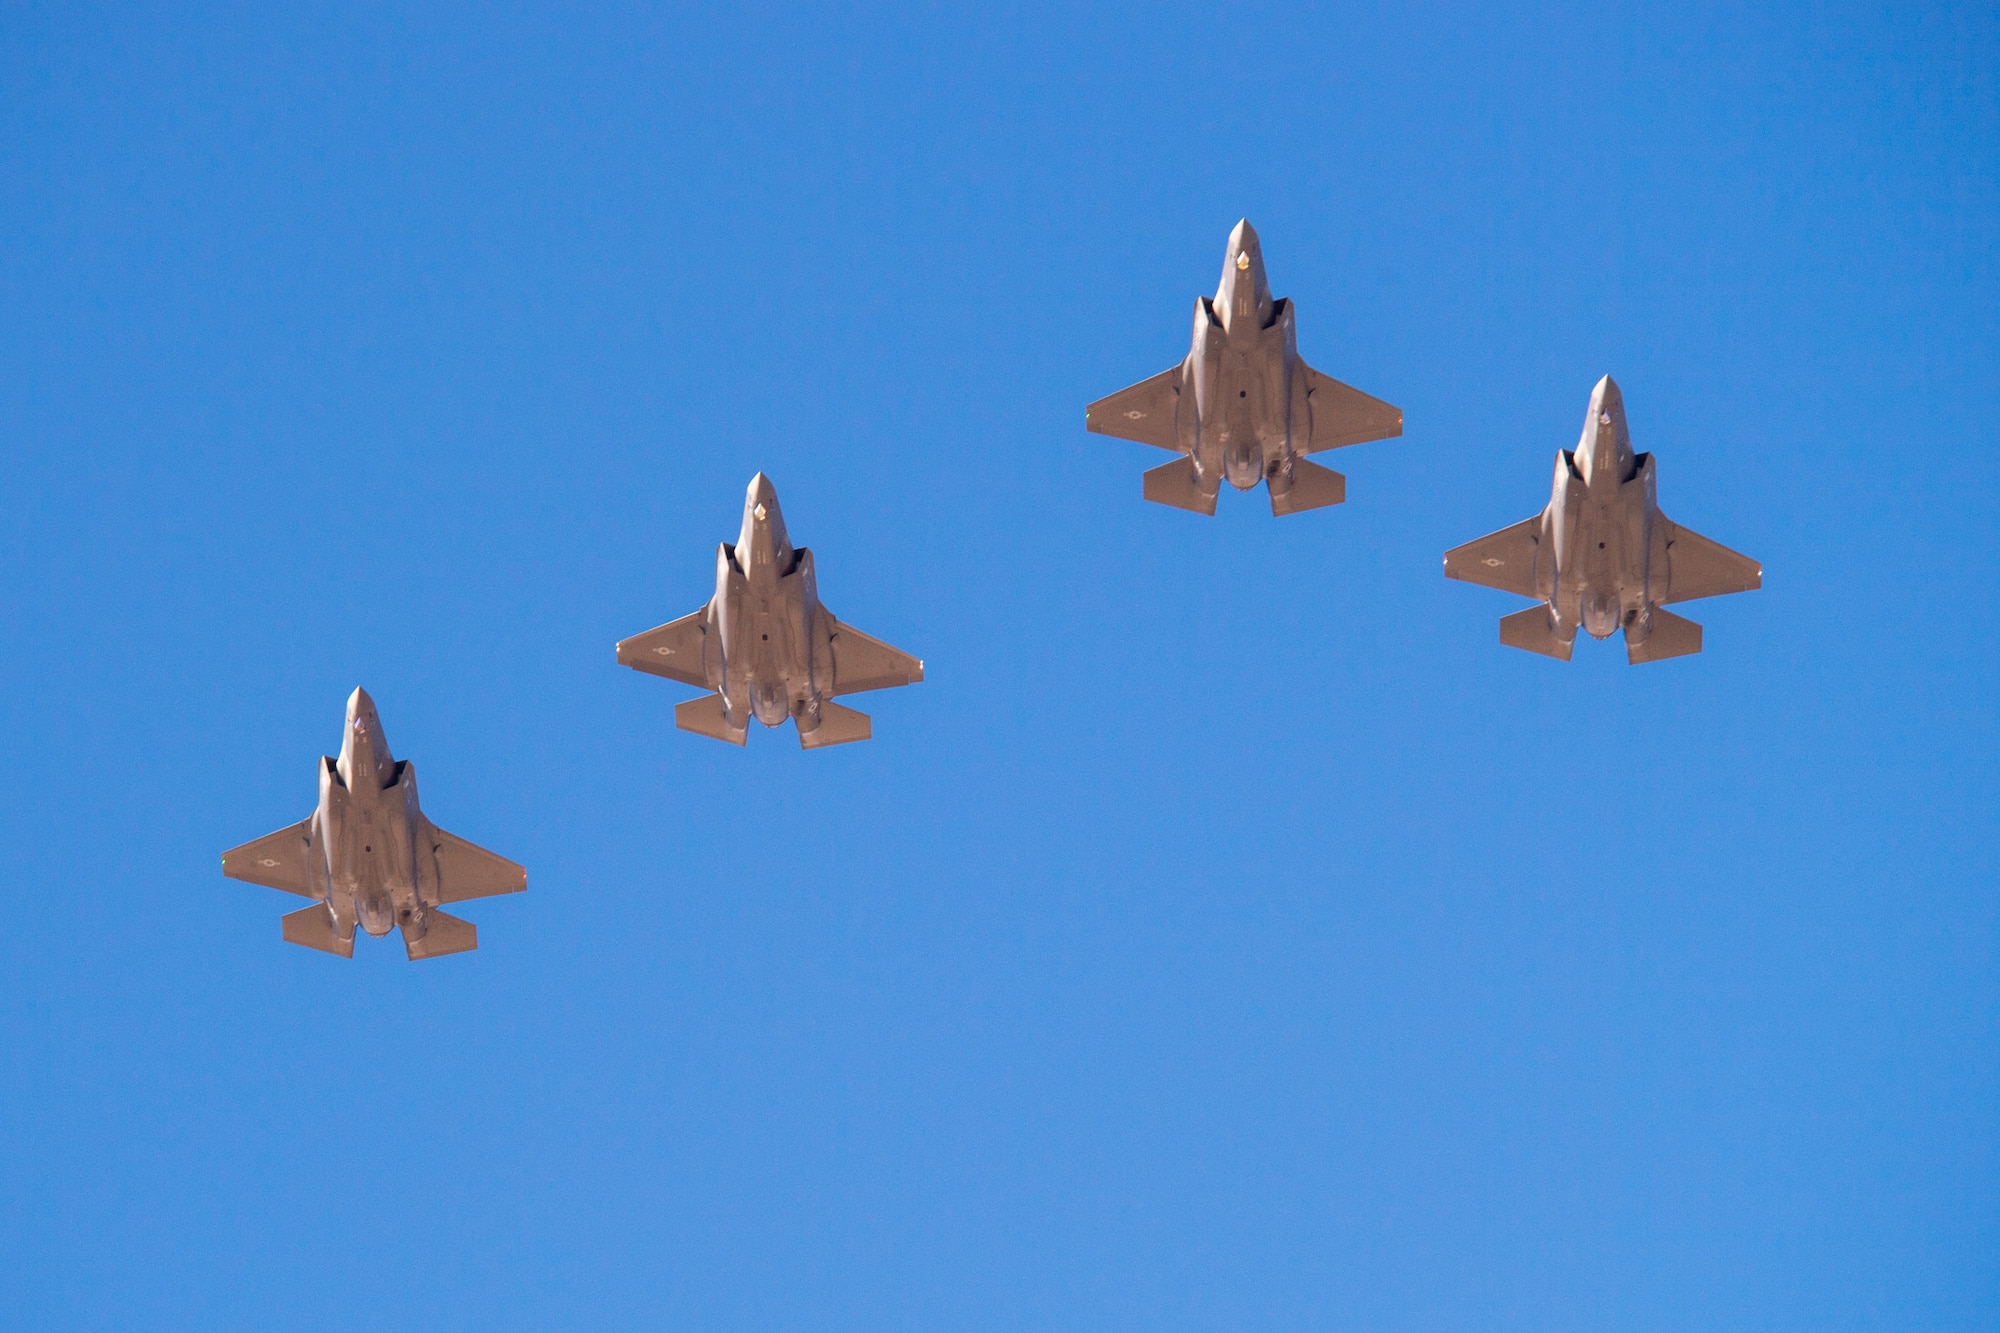 F-35A Lightning IIs from the 388th and 419th Fighter Wing fly by in formation as part of a combat power exercise at Hill Air Force Base, Utah. The exercise aims to confirm their ability to quickly employ a large force of jets against air and ground targets, and demonstrate the readiness and lethality of the F-35 Lightning II. As the first combat-ready F-35 units in the Air Force, the 388th and 419th FWs are ready to deploy anywhere in the world at a moment’s notice. (United States Air Force photo/Cynthia Griggs)